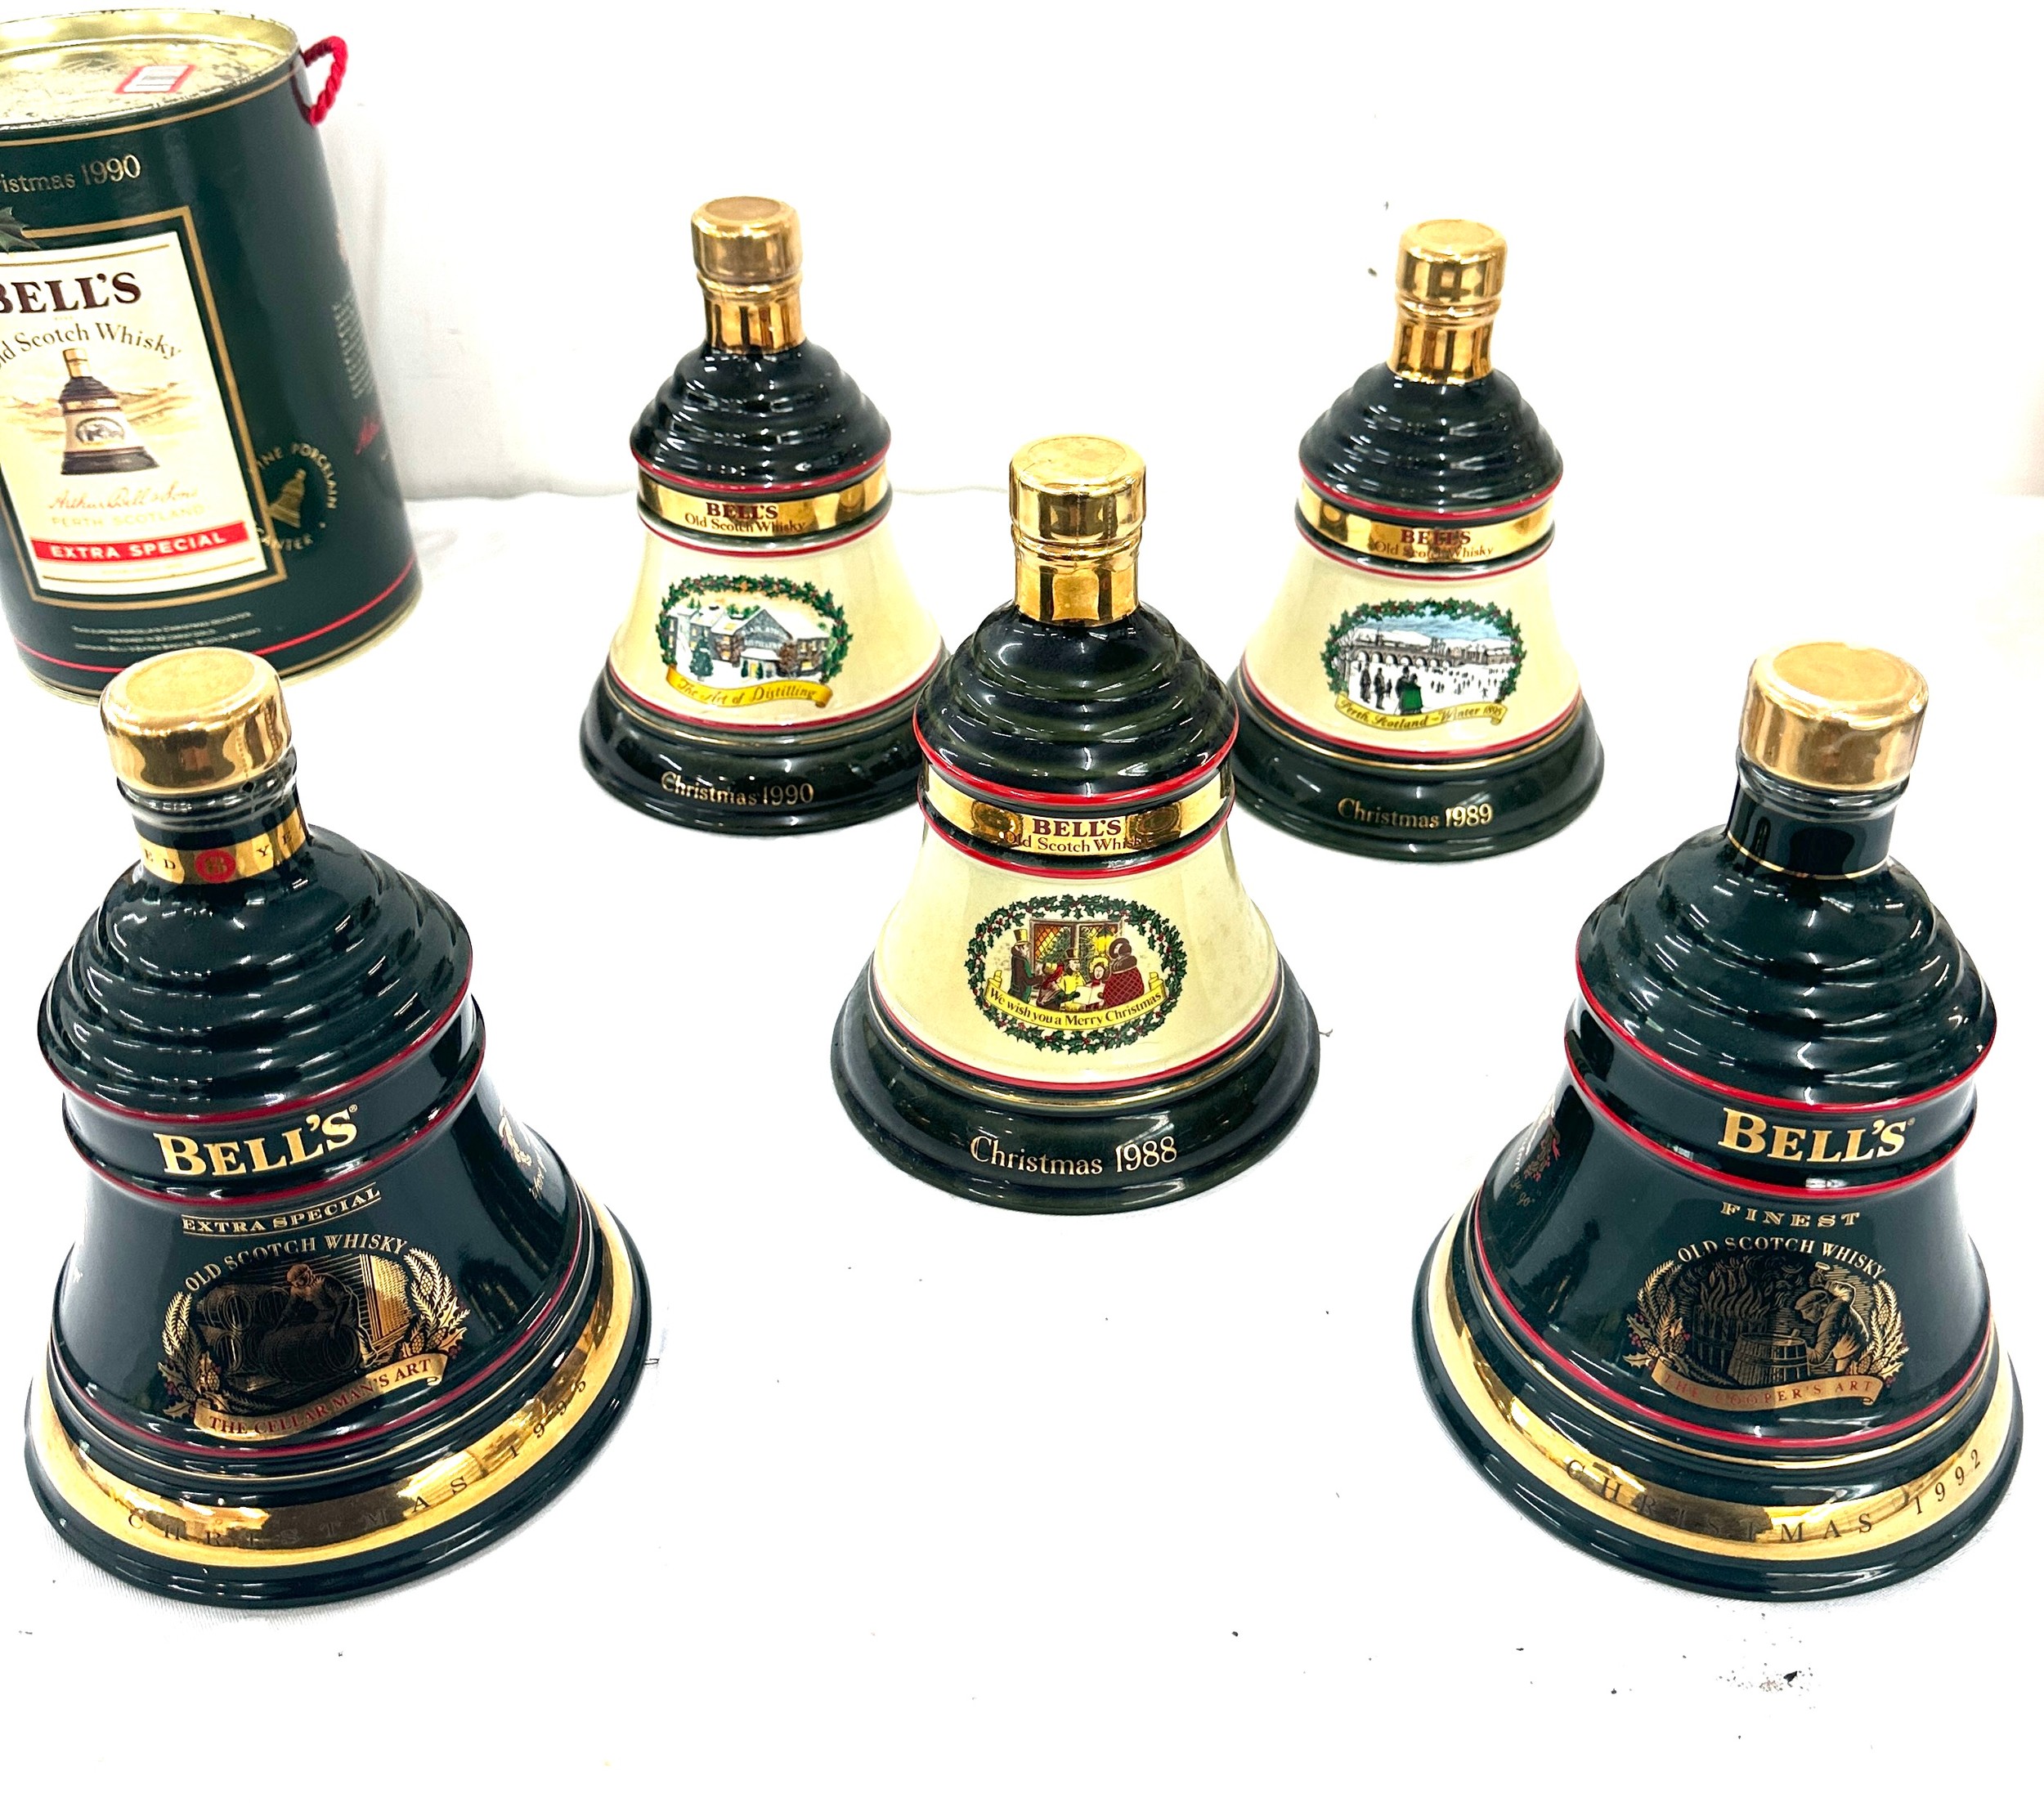 Selection of Bells Old Scotch Whisky Christmas decanters to include Christmas 1990, 1988, 1989, 1992 - Image 8 of 8